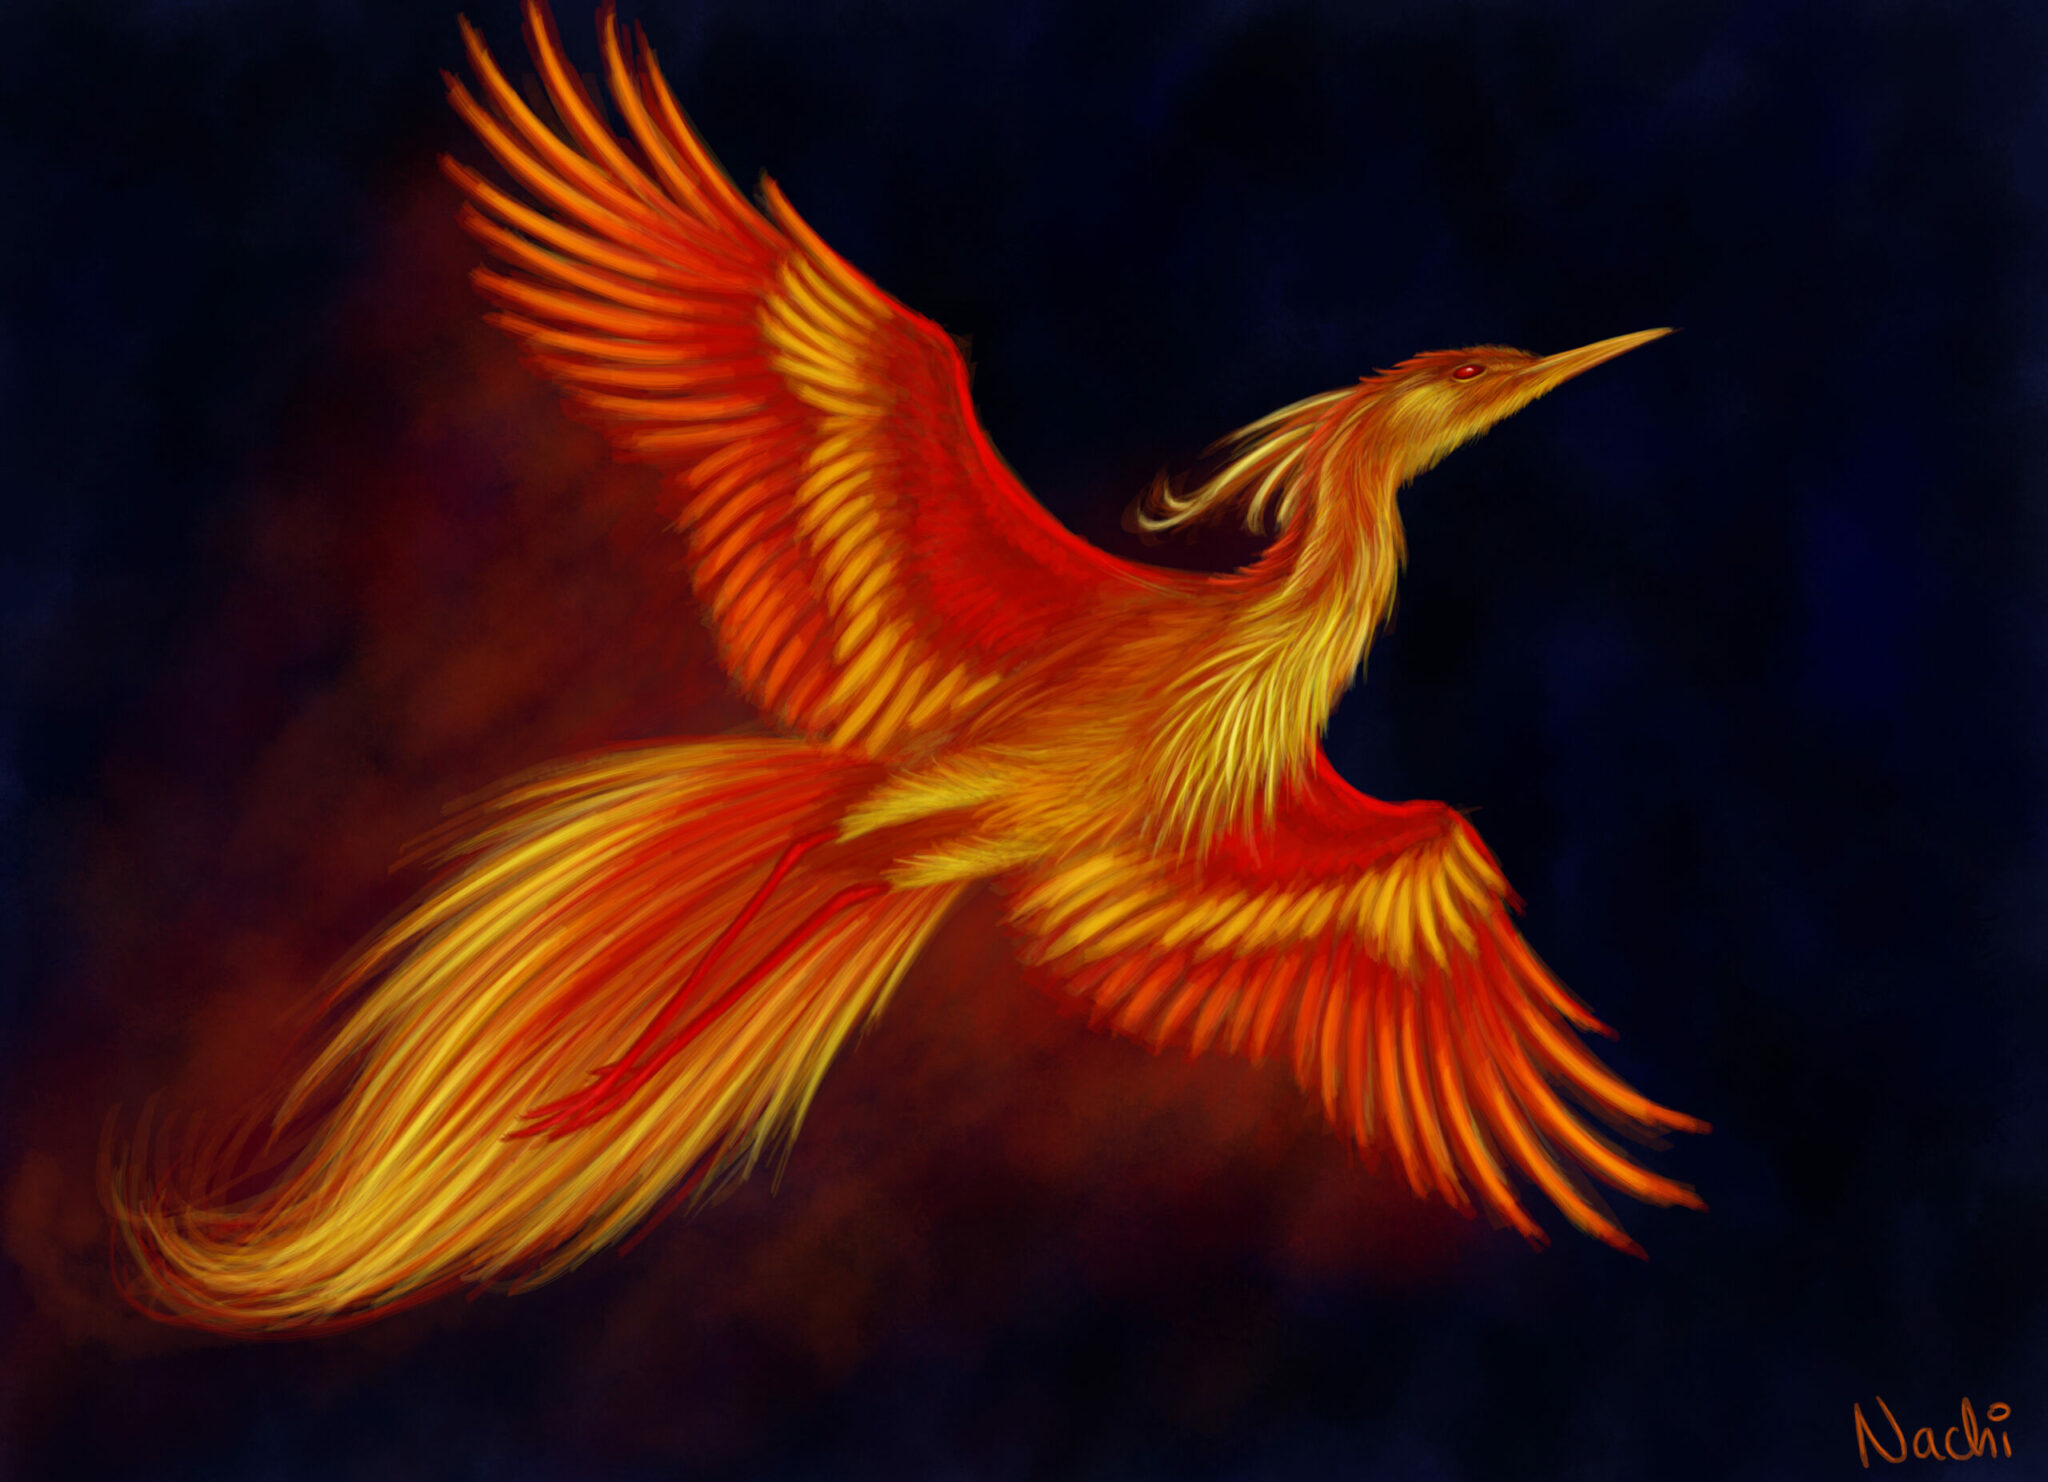 Was the Phoenix Ever a Real Bird? - Zippy Facts